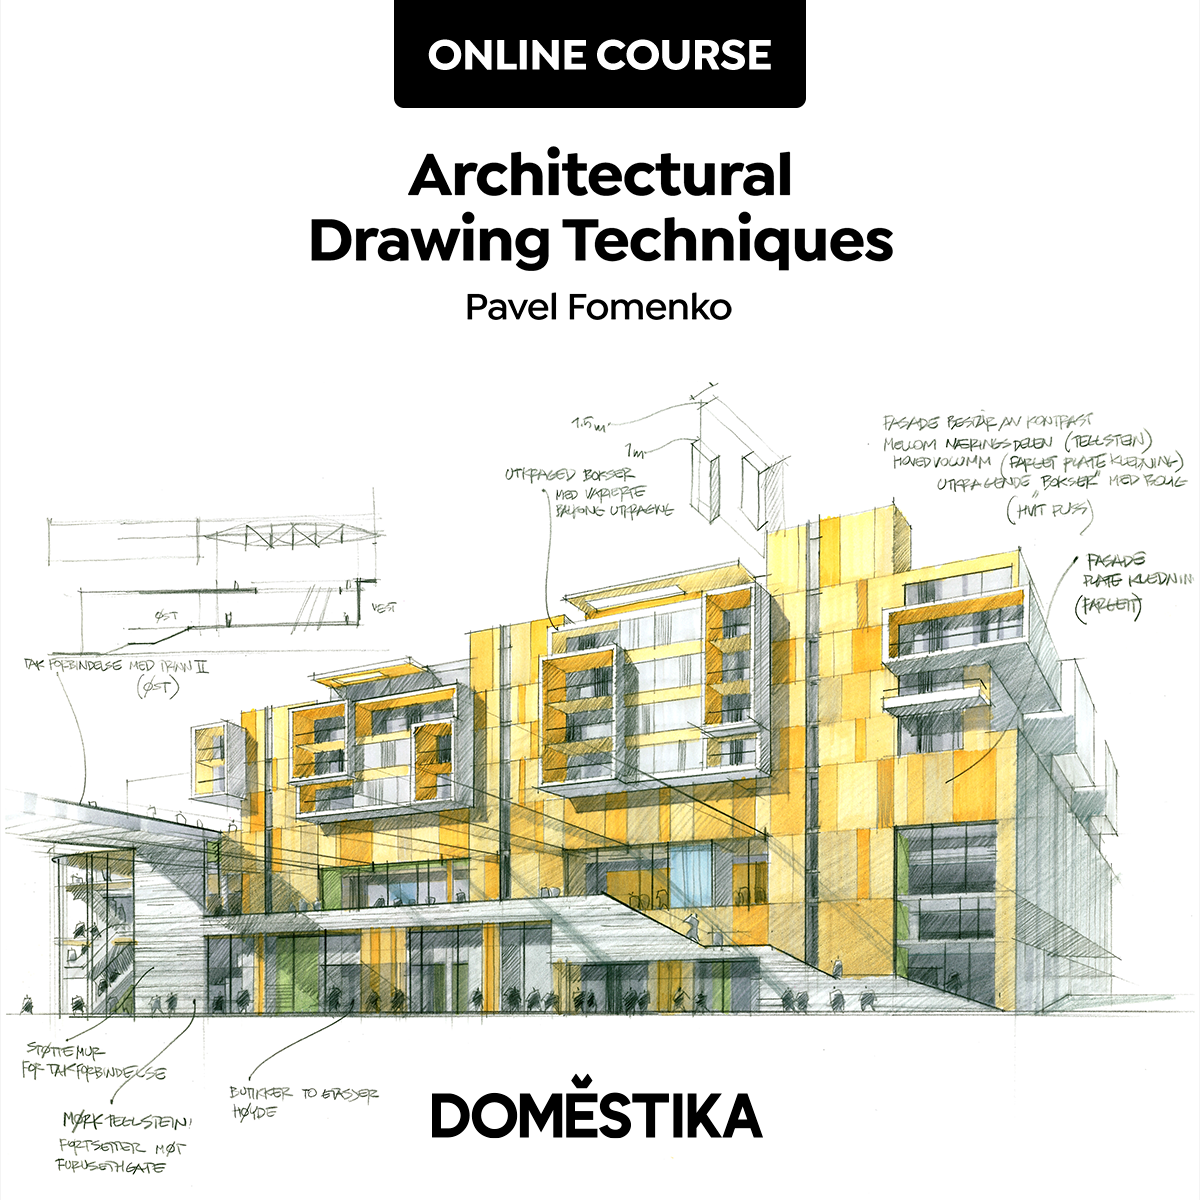 Architectural Drawing: From Imagination to Conceptualization